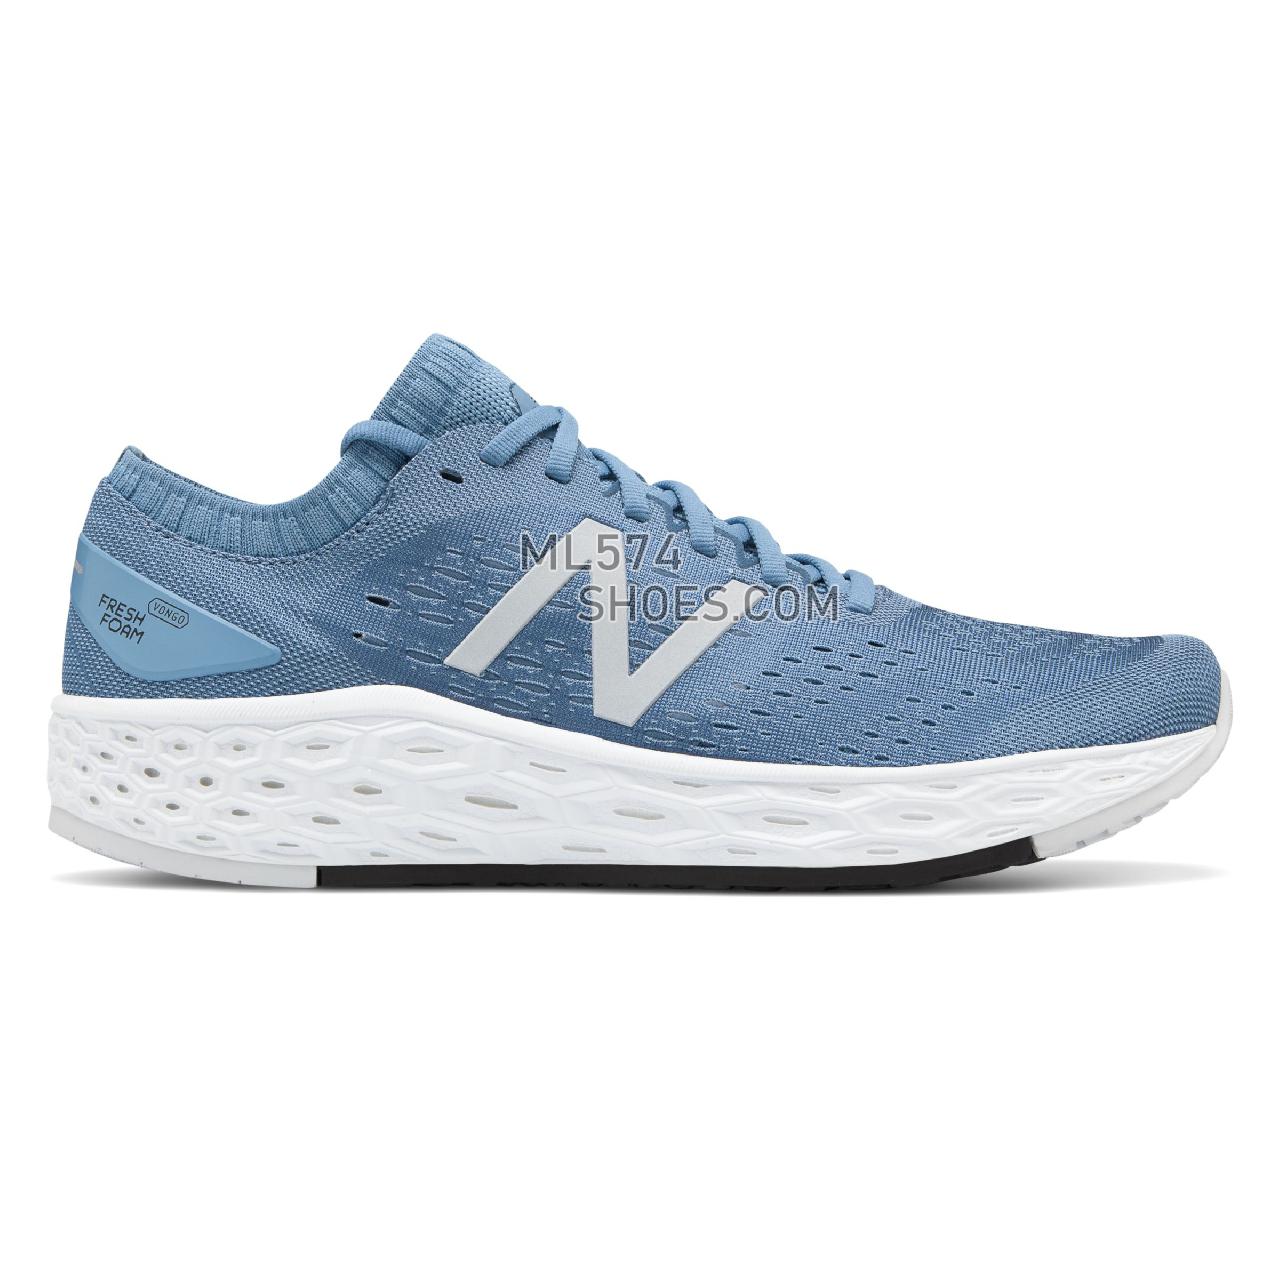 New Balance Fresh Foam Vongo v4 - Men's Stability Running - Chambray with Lyons Blue and Energy Red - MVNGOLB4